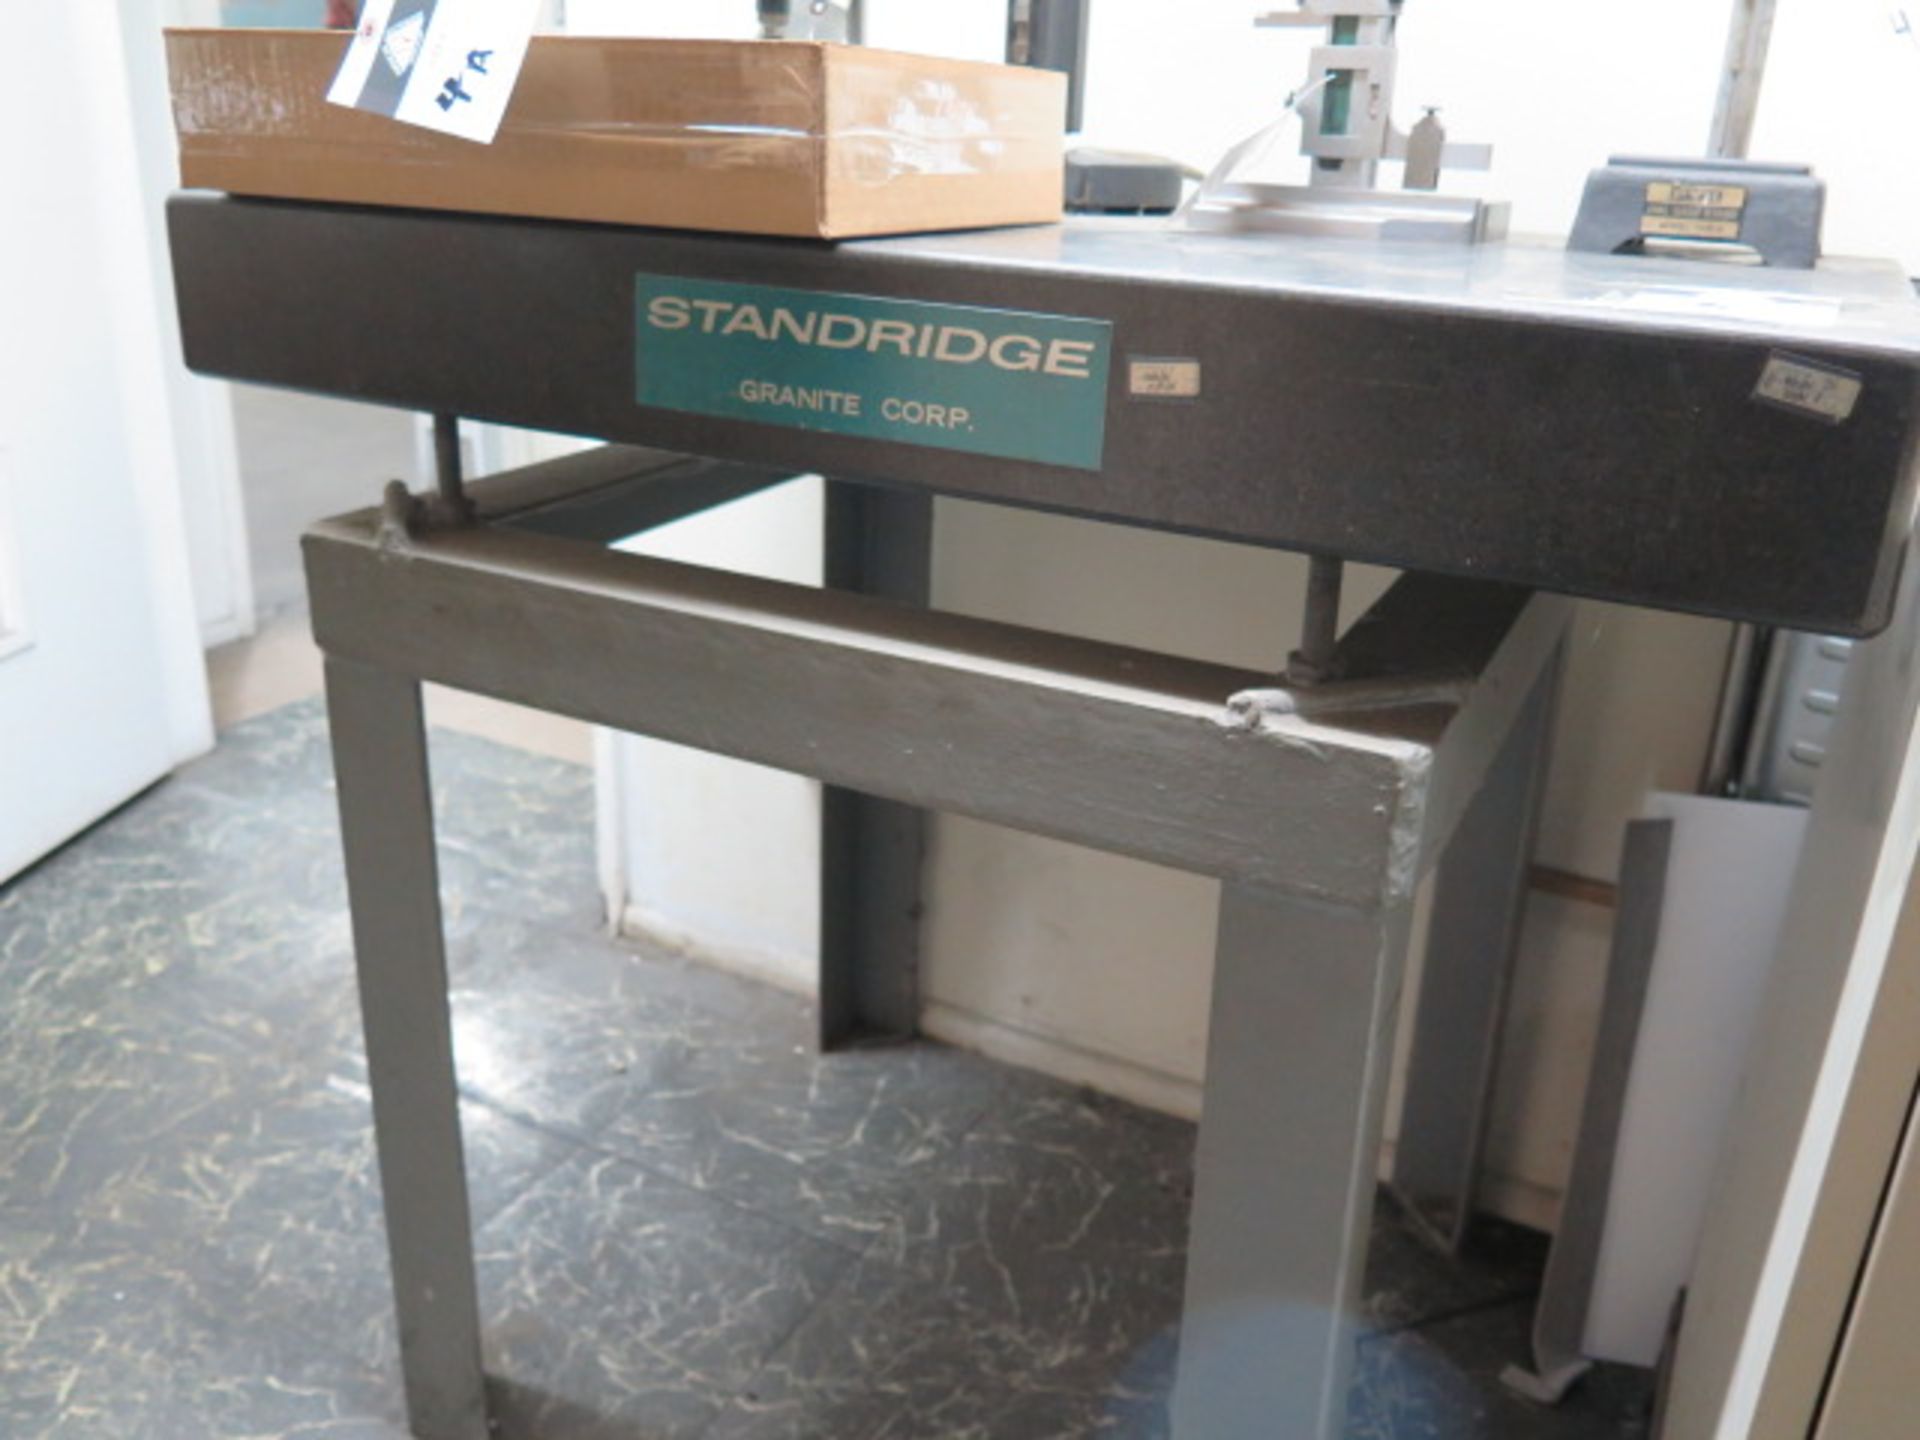 Standridge 24" x 36" x 4 1/2" Granite Surface Plate w/ Stand (SOLD AS-IS - NO WARRANTY) - Image 3 of 4